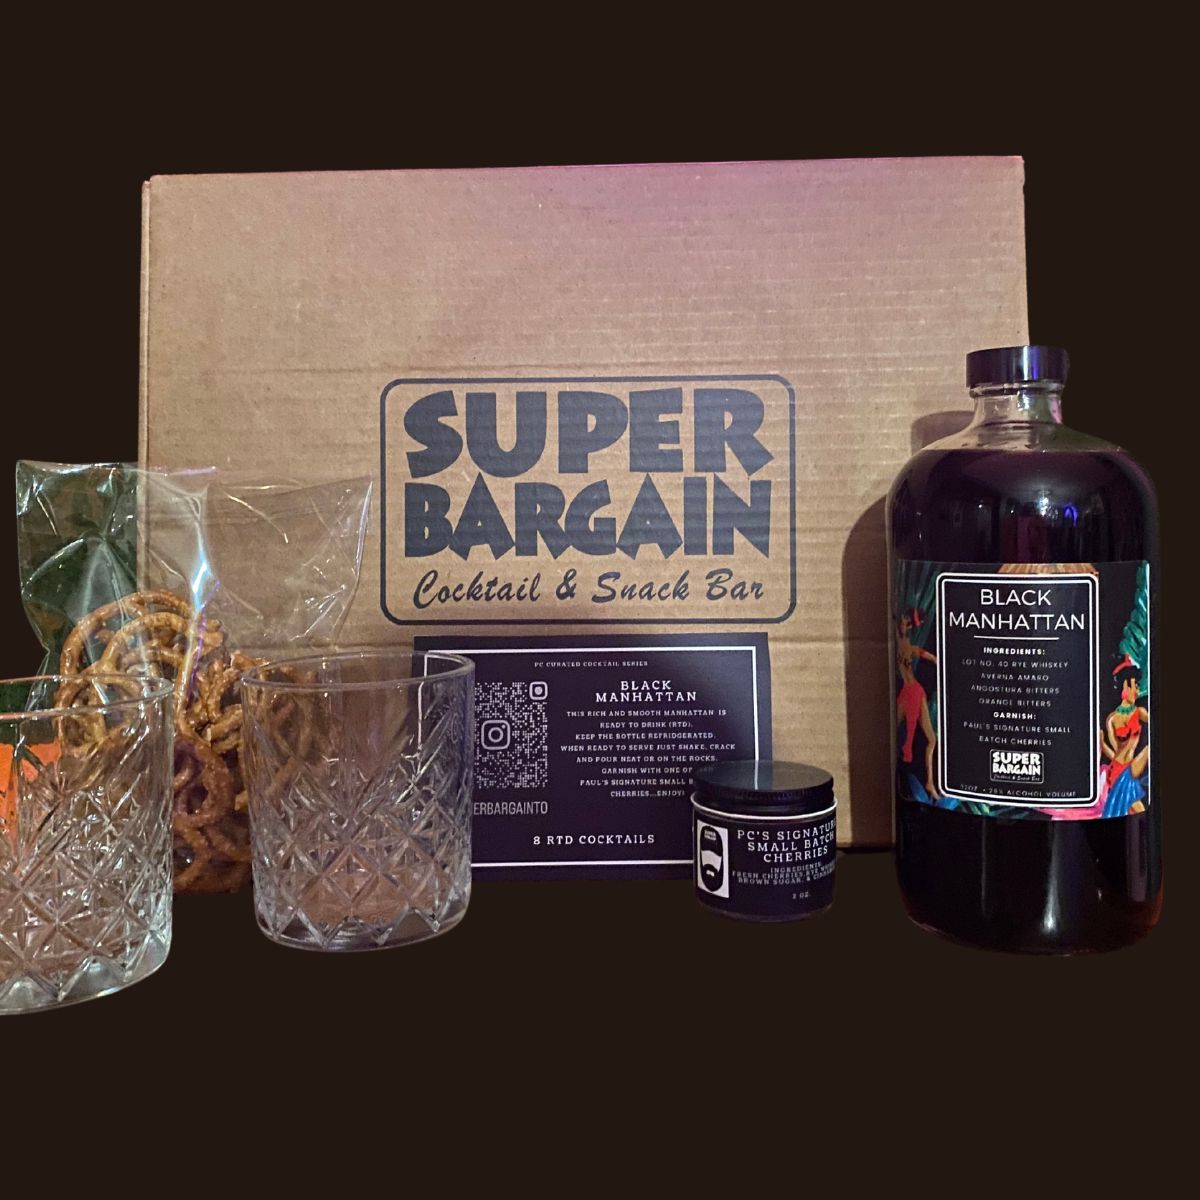 A cocktail kit labeled "Super Bargain Cocktail & Snack Bar," featuring a bottle of premium bourbon "Black Manhattan RTD Cocktail Gift Box, two crystal glasses, snacks in clear bags, and a small candle, arranged on a dark surface.